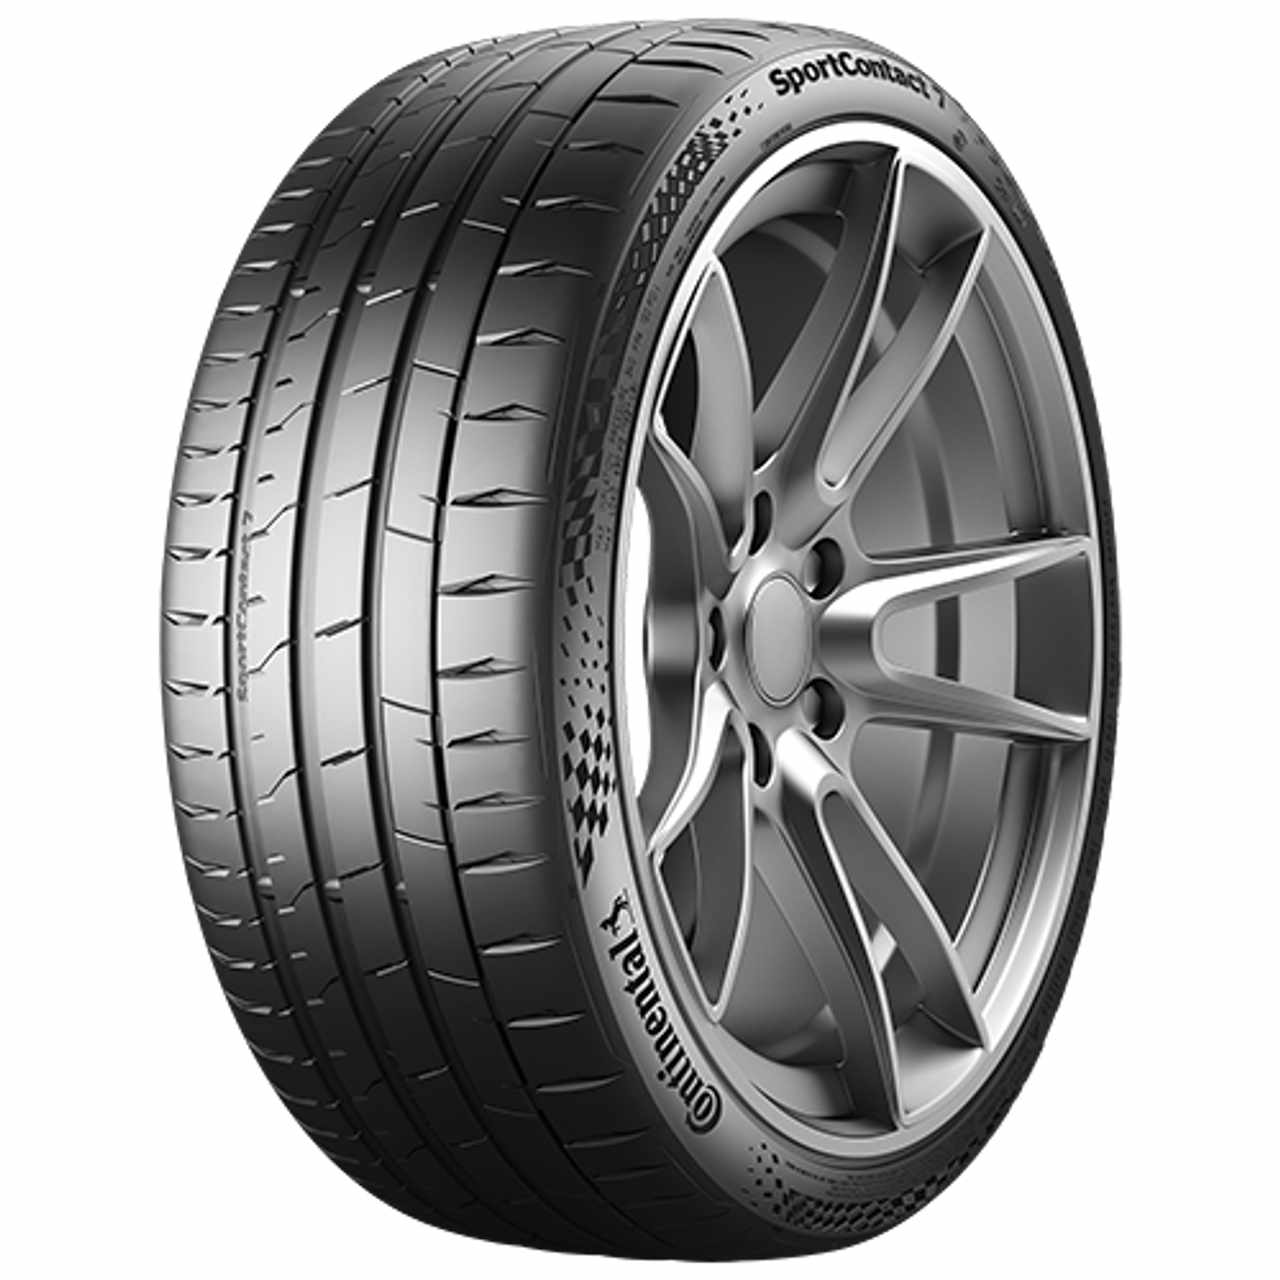 CONTINENTAL SPORTCONTACT 7 (EVc) 235/45R19 95Y CONTISILENT FR BSW